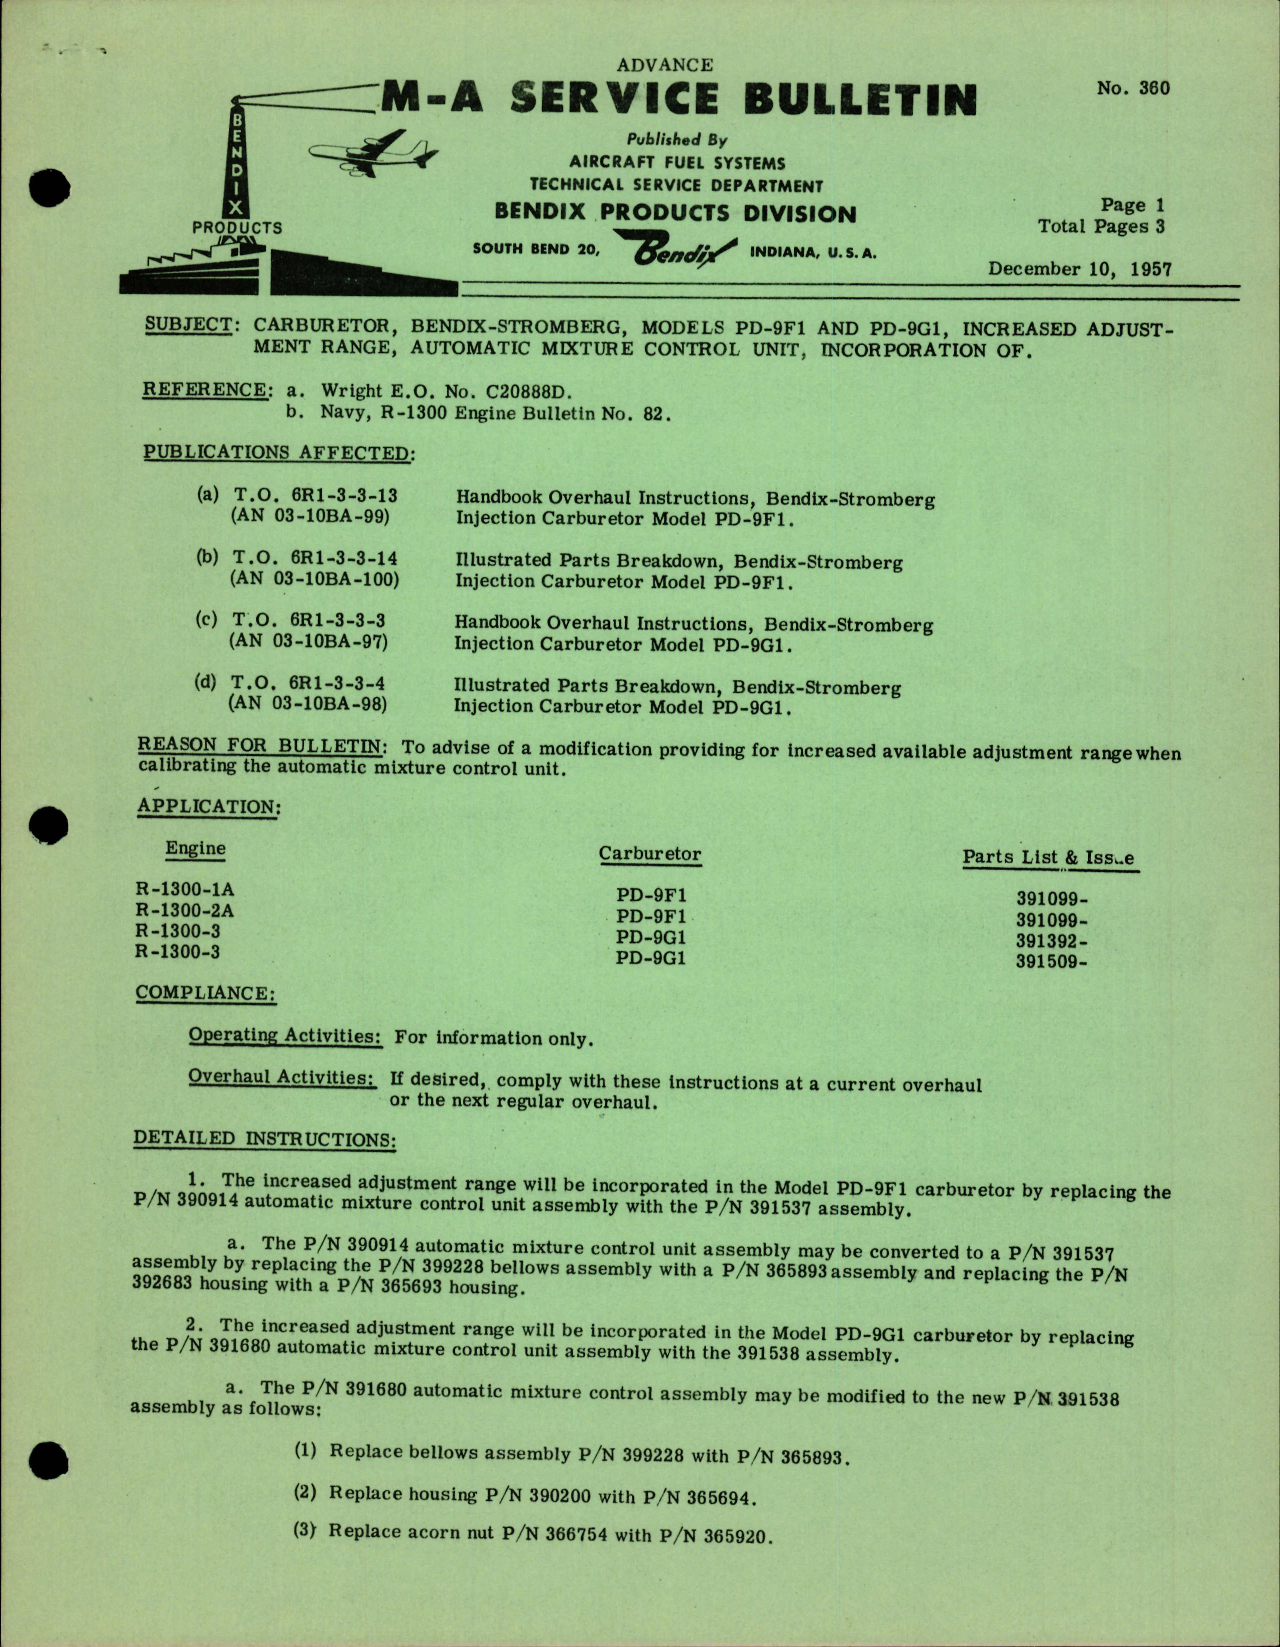 Sample page 1 from AirCorps Library document: Carburetor, Bendix Stromberg, Models PD-9F1 and PD-9G1, Increased Adjustment Range, Automatic Mixture Control Unit, Incorporation